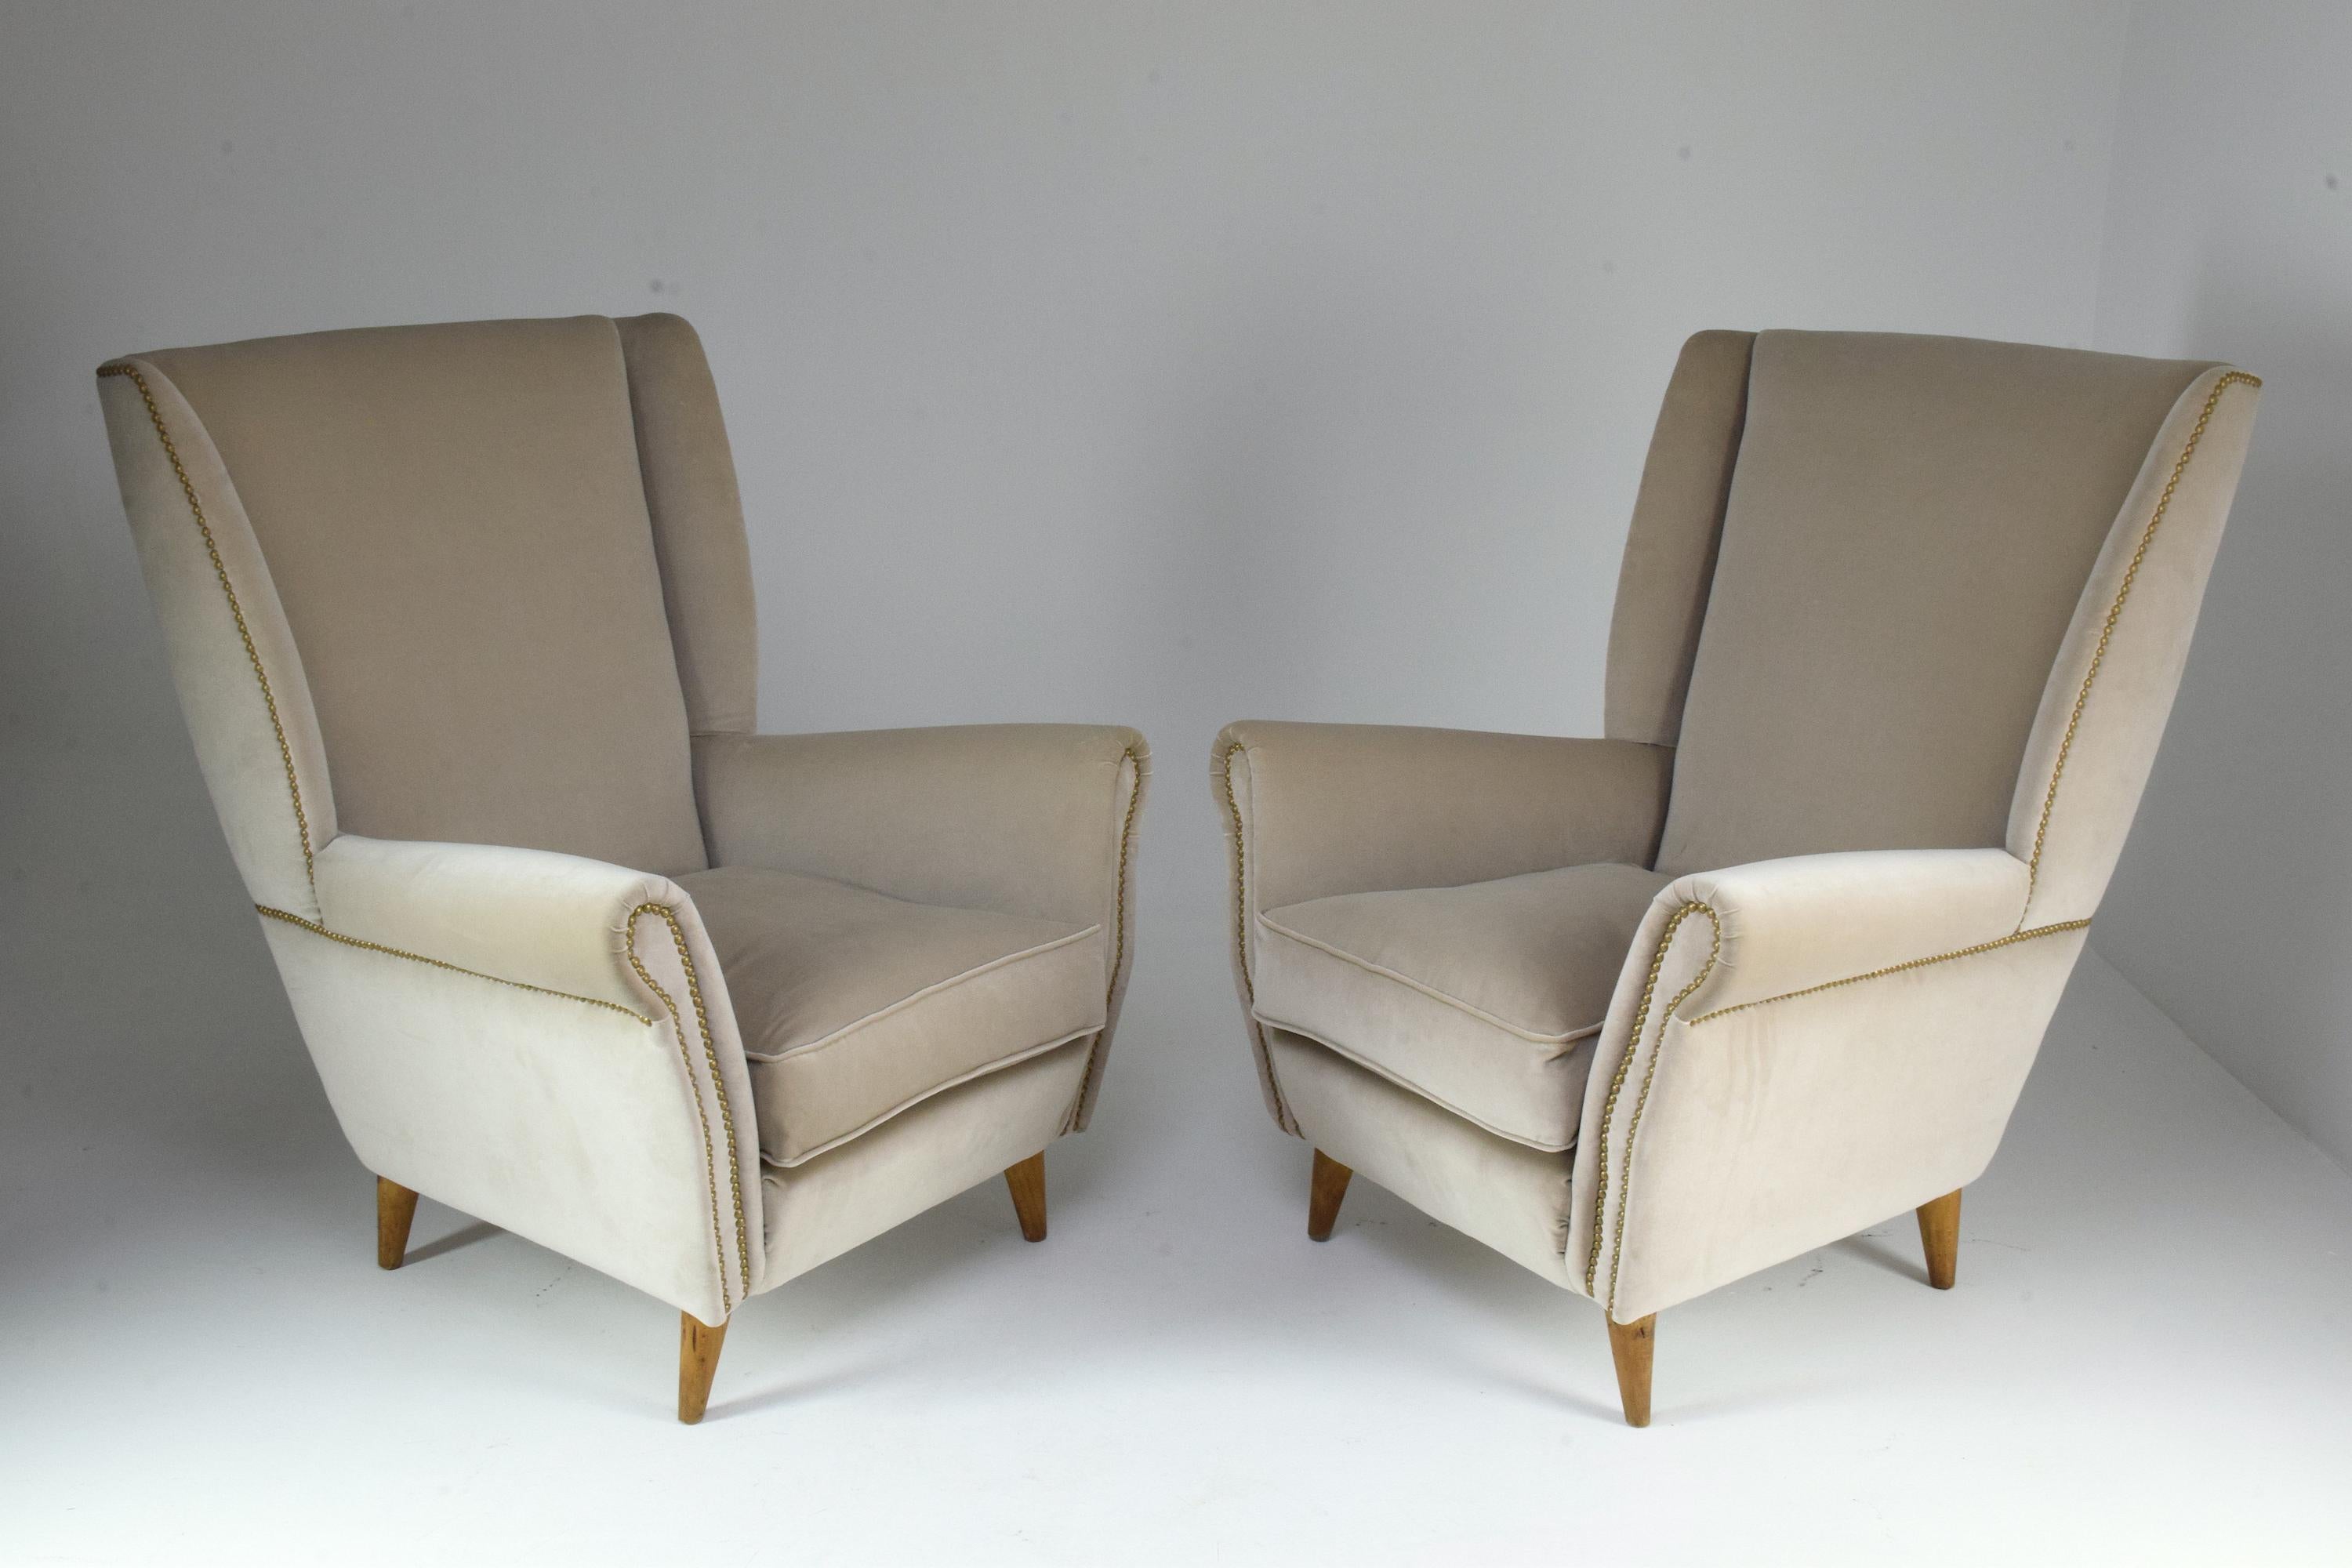 Set of two Italian design Classic armchairs or lounge chairs by iconic designer Gio Ponti from the 1940s. In fully restored condition, with new padding, velvet upholstery, and nailhead trim.

All our pieces are fully restored at our atelier and we